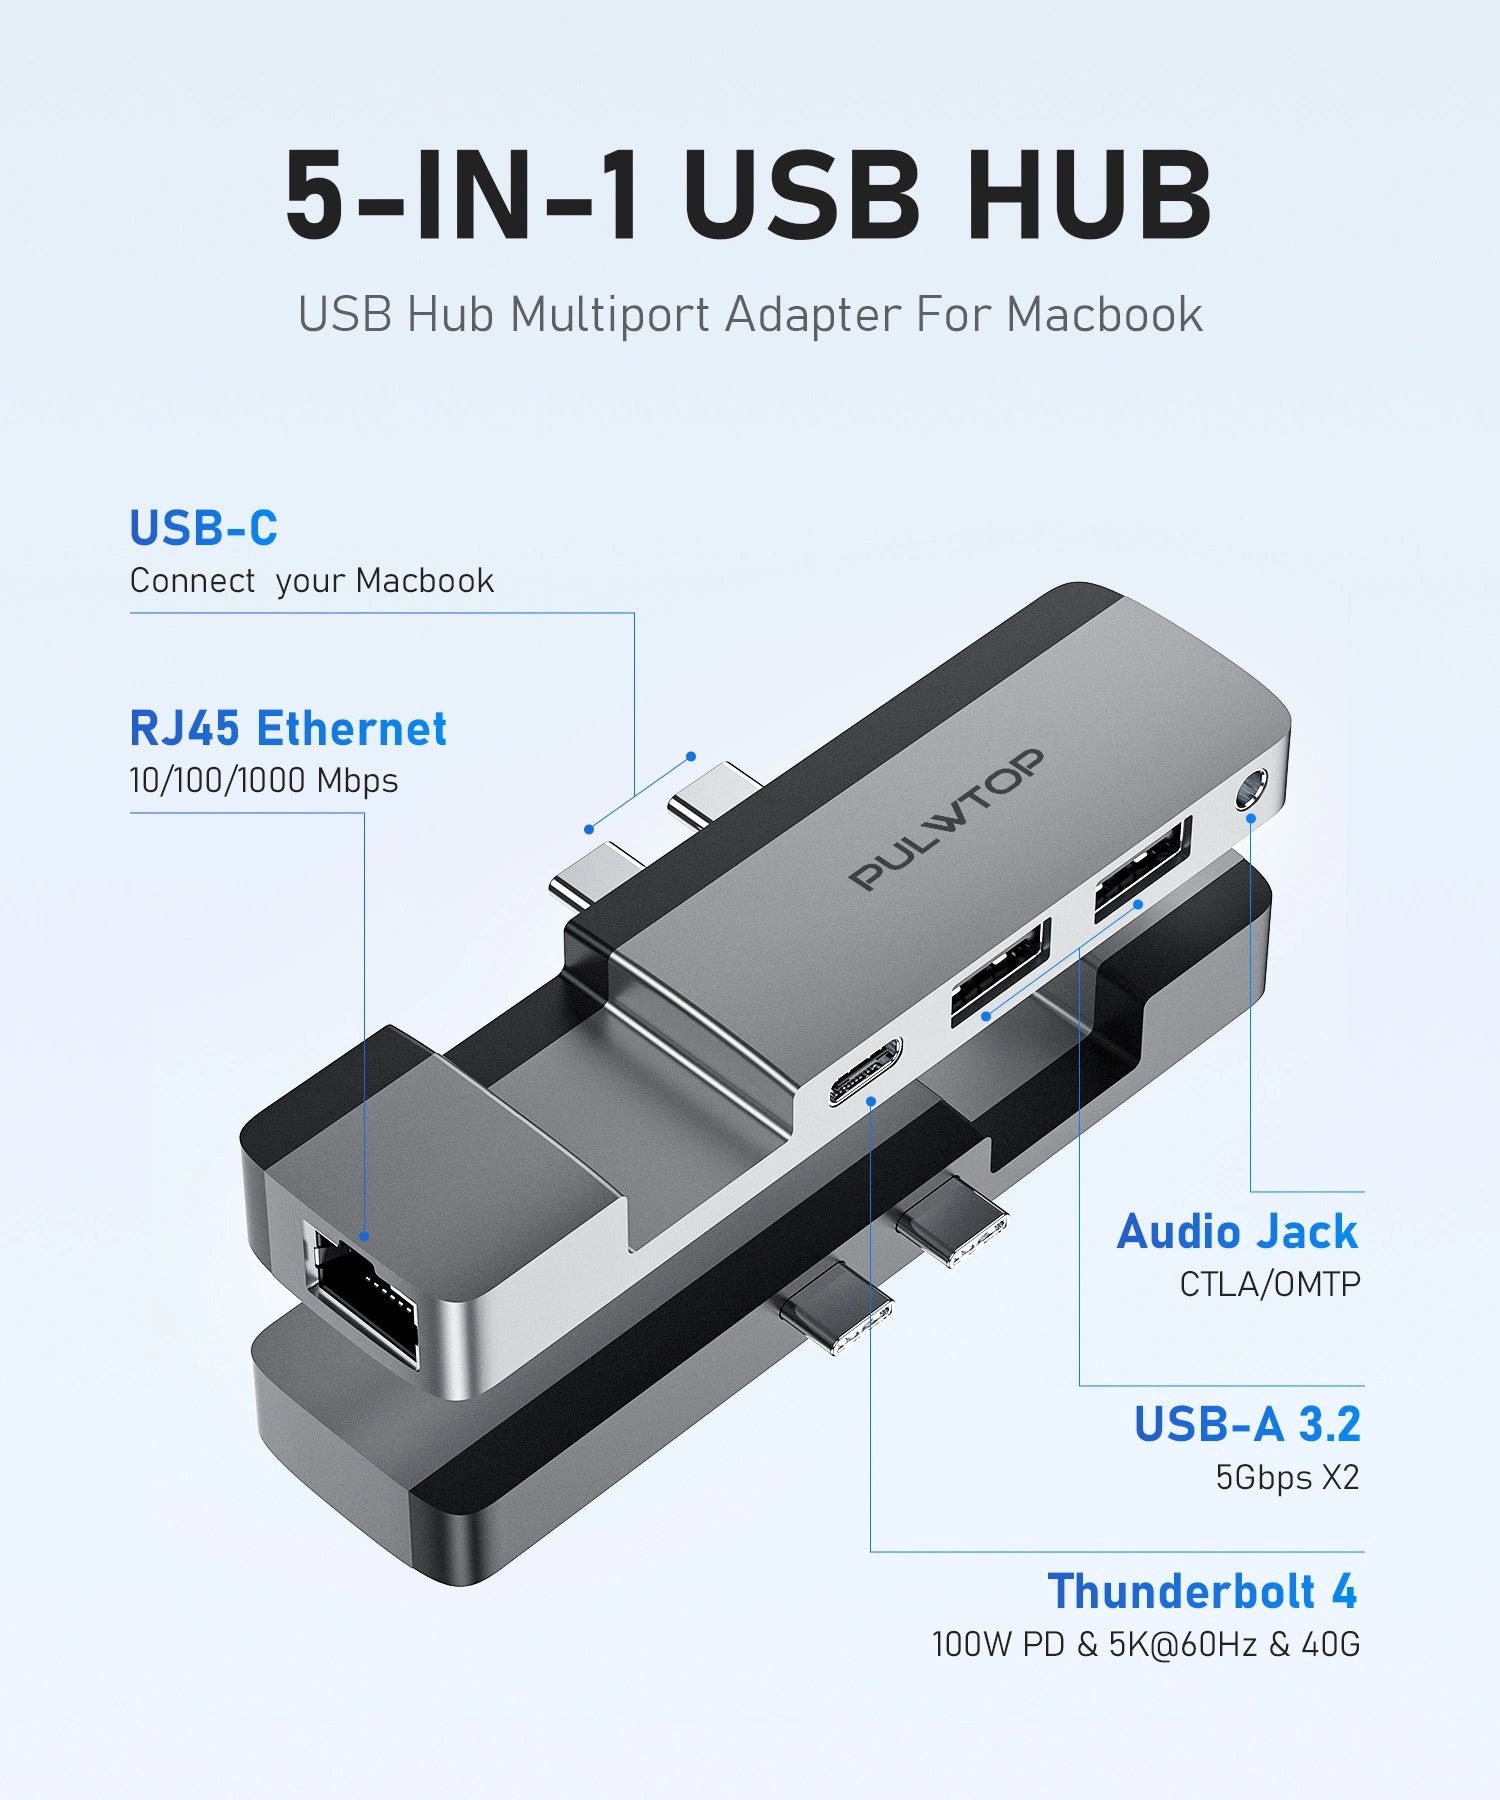 PULWTOP USB C hub for MacBook with multi-function USB C port (supports 5K@60Hz, data transfer, 100W power supply), suitable for M1, M2 MacBook Air/Pro